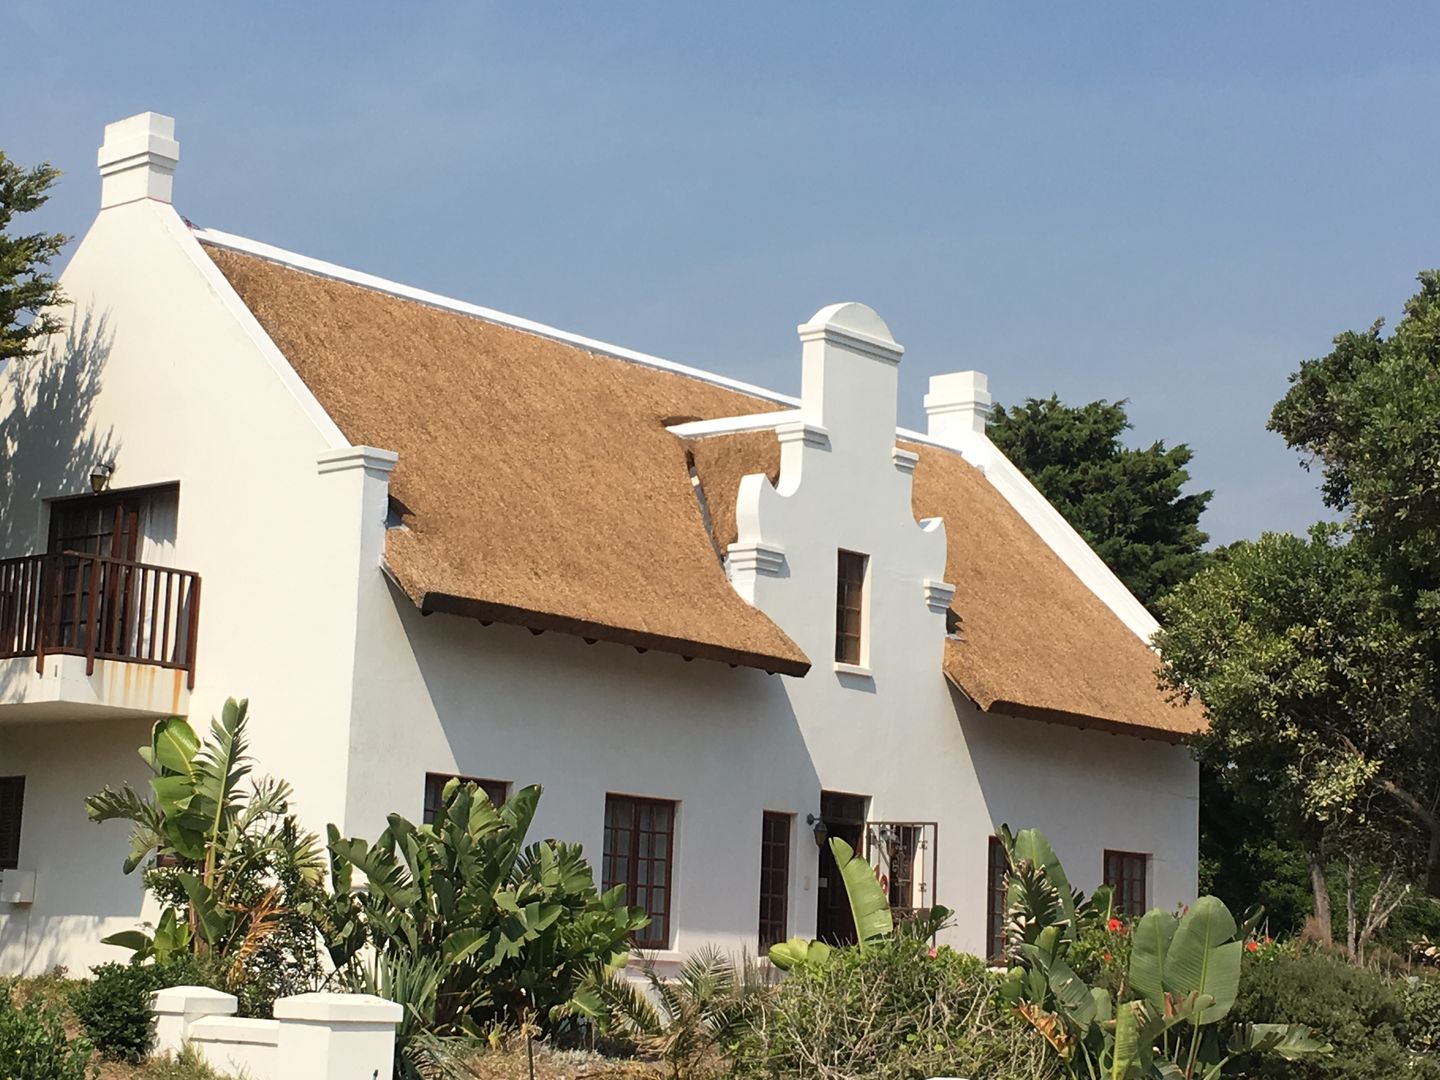 Colonial Style Home with Thatched Roof Bosazza Roofing & Timber Homes Colonial style houses